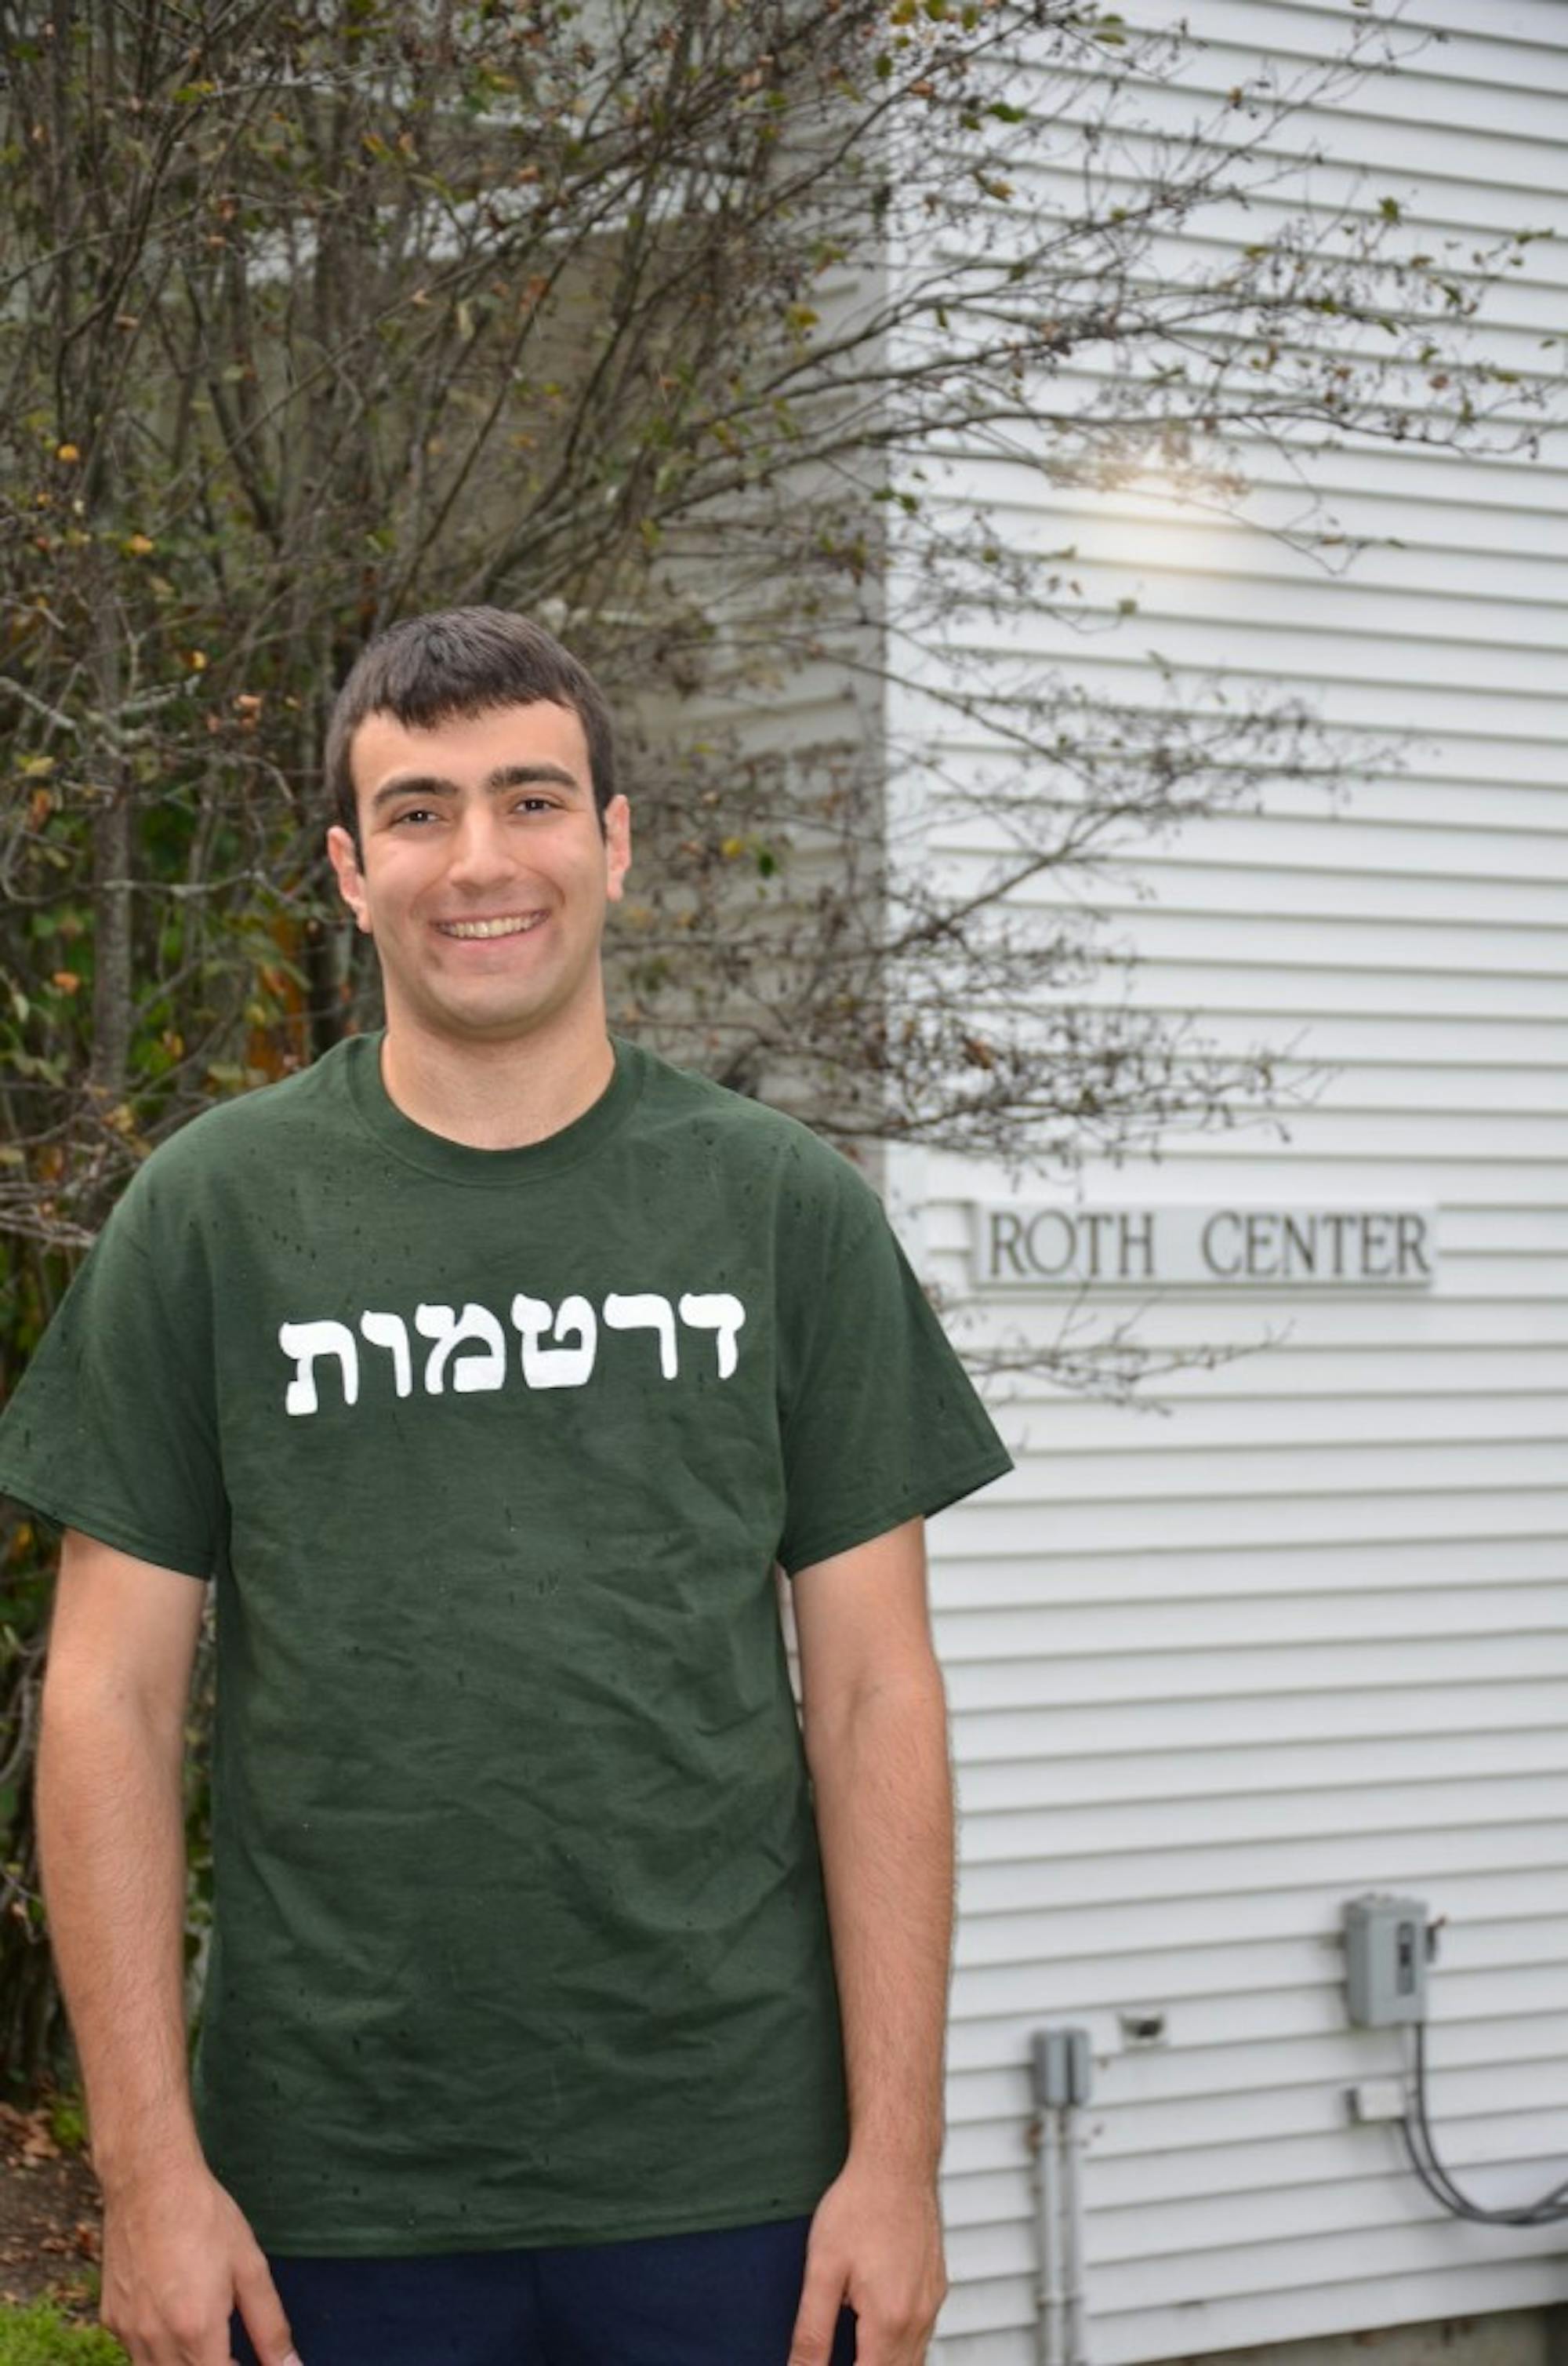 Libby writes about finding unexpected community at Dartmouth College Hillel.